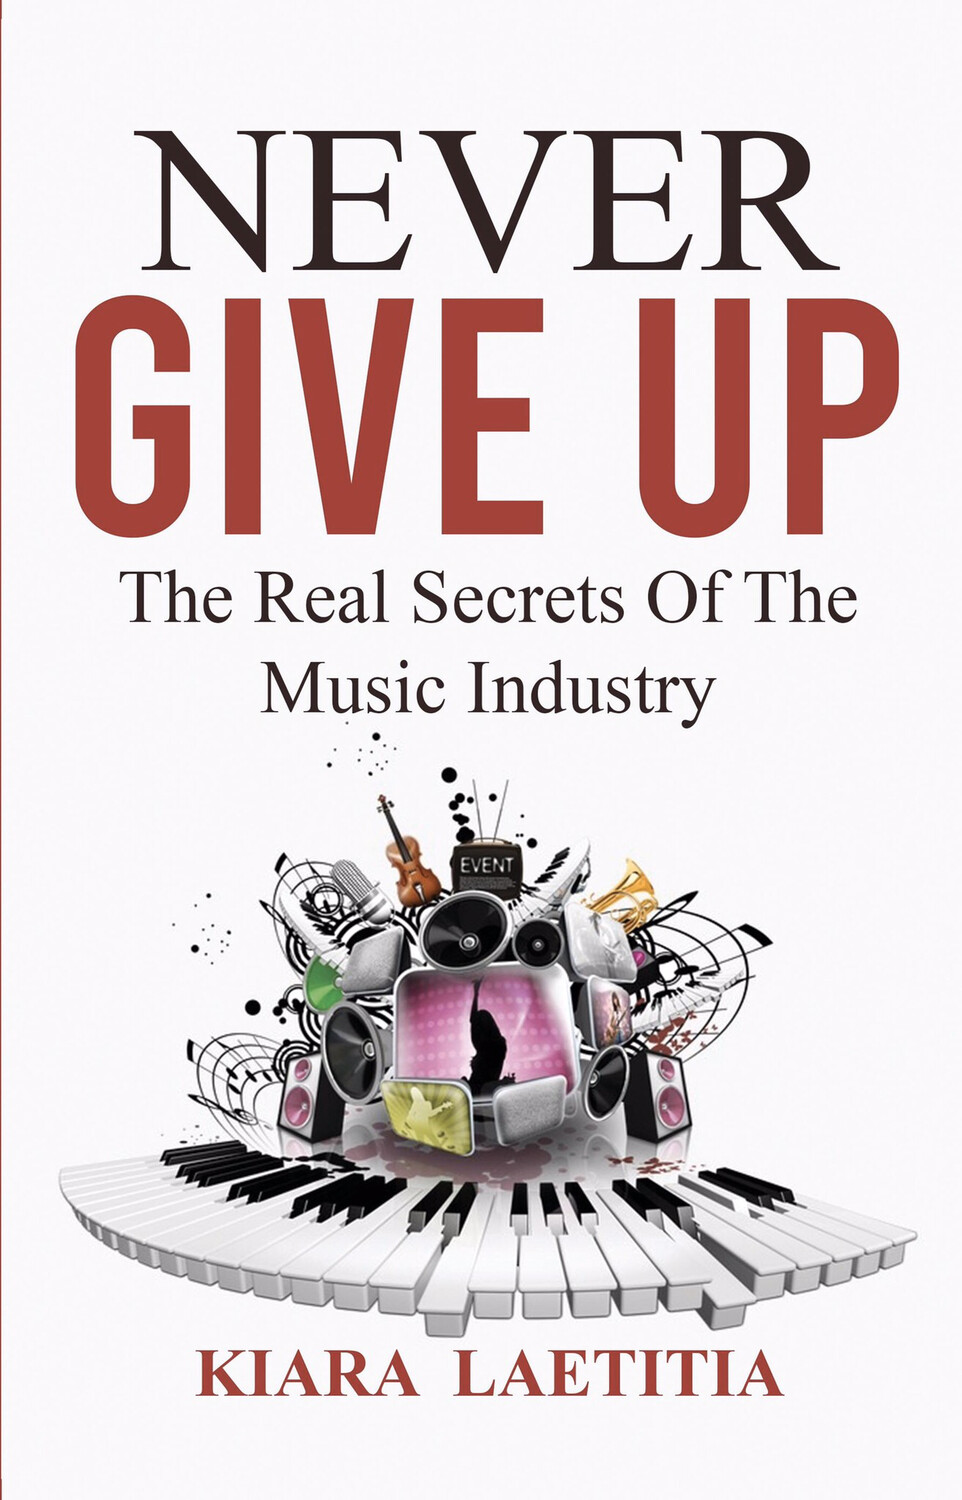 Paperback - Never Give Up The Real Secrets Of The Music Industry